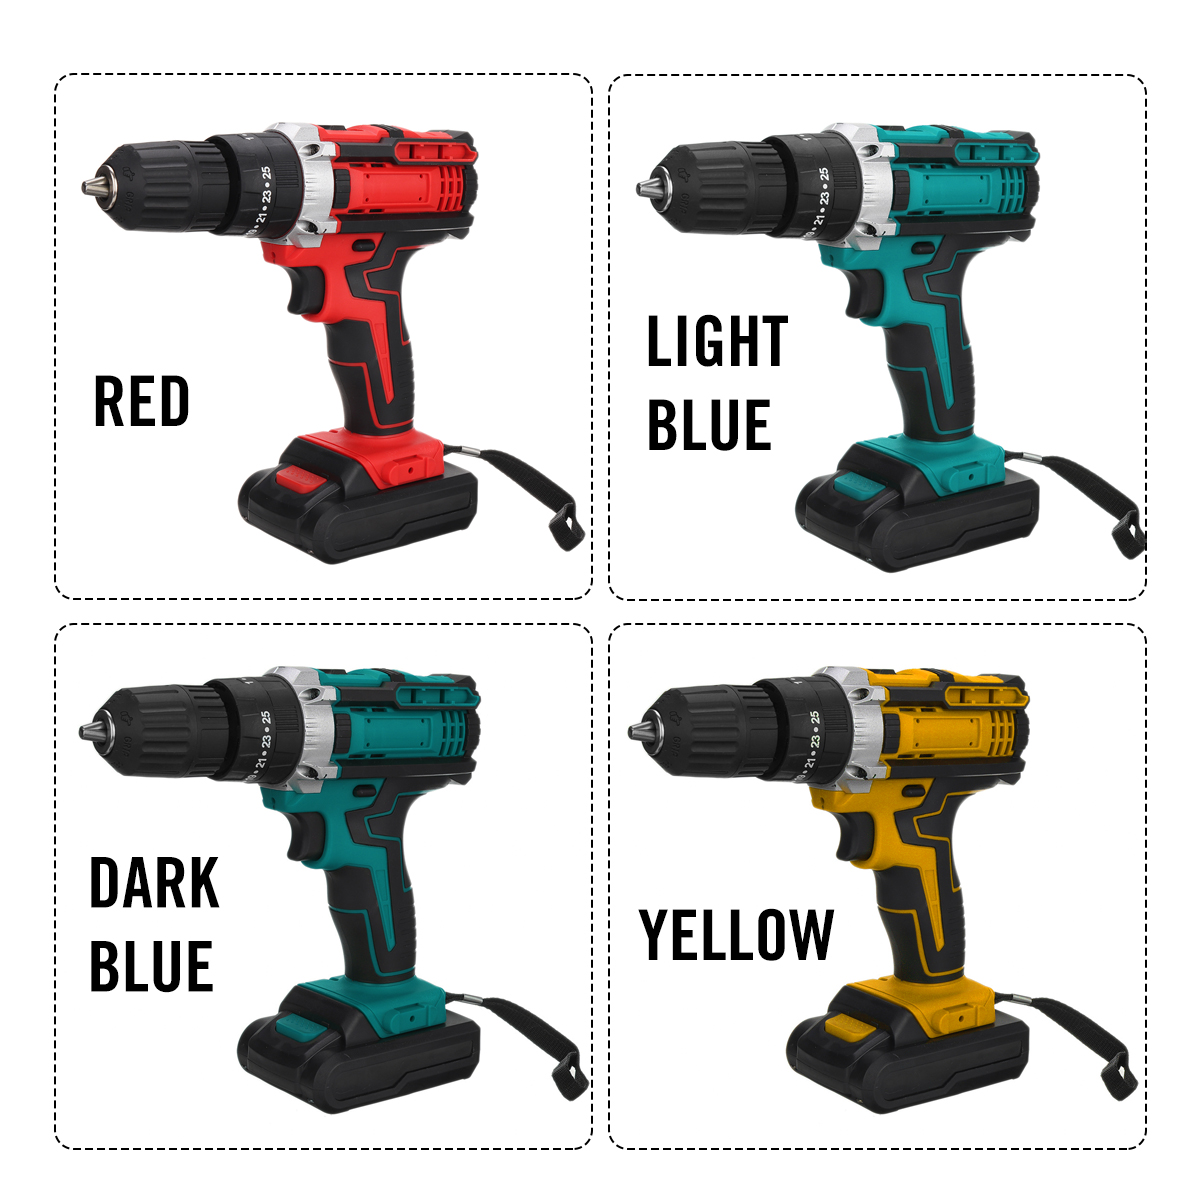 Cordless-Rechargeable-Electric-Drill-Screwdriver-LED-Portable-Metal-Wood-Drilling-Tool-W-12pcs-Batte-1848724-9